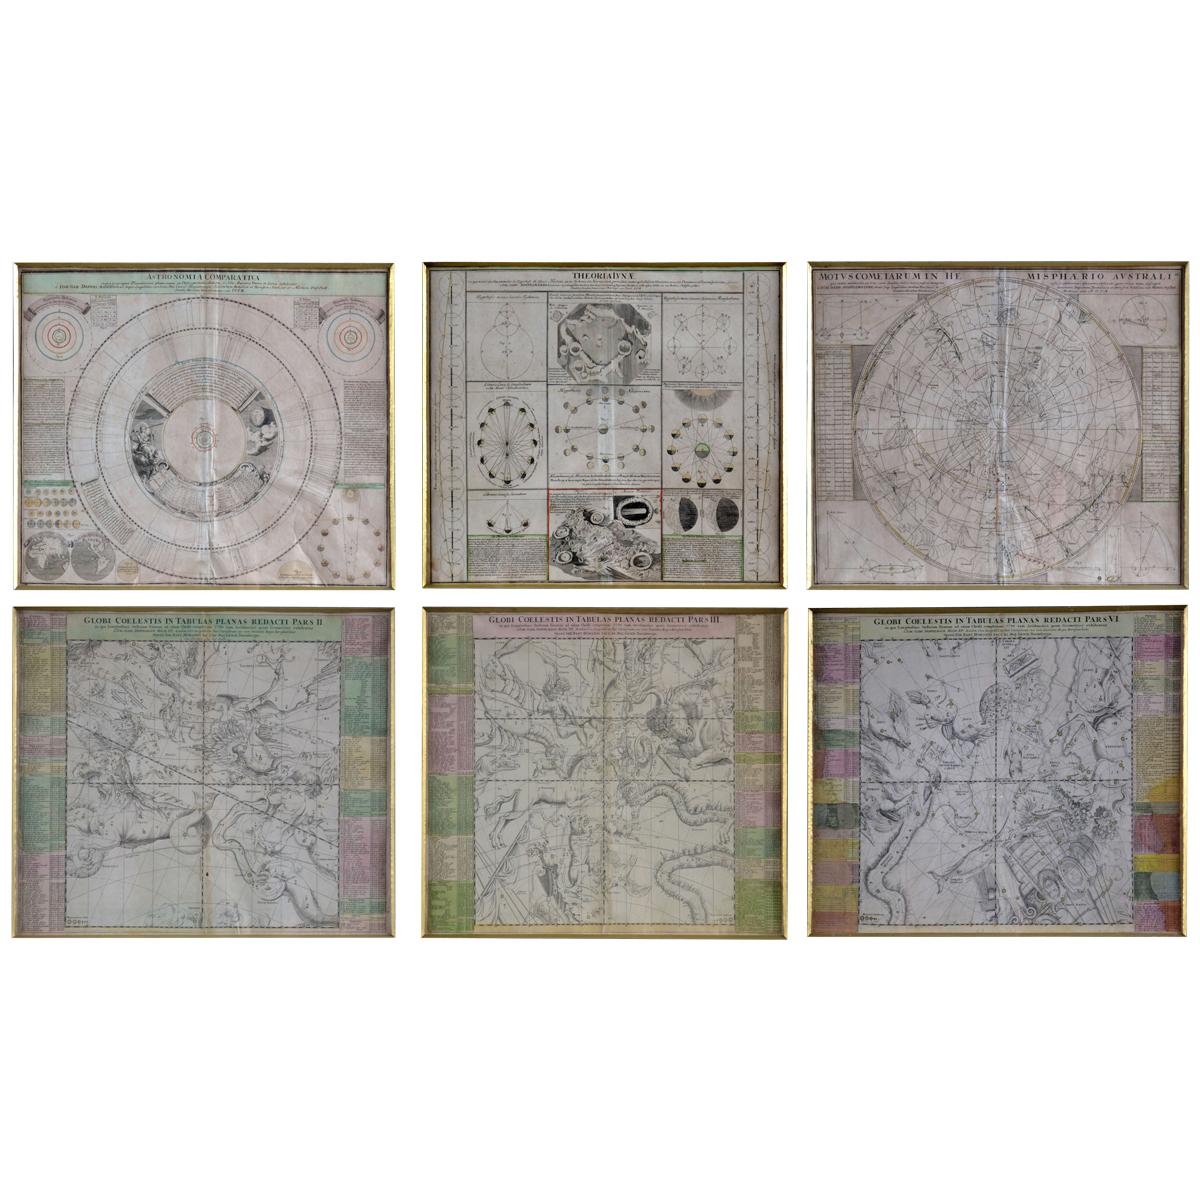 Six Engravings Celestial Charts, Cartographer, Astronomer Doppelmayr from 1740